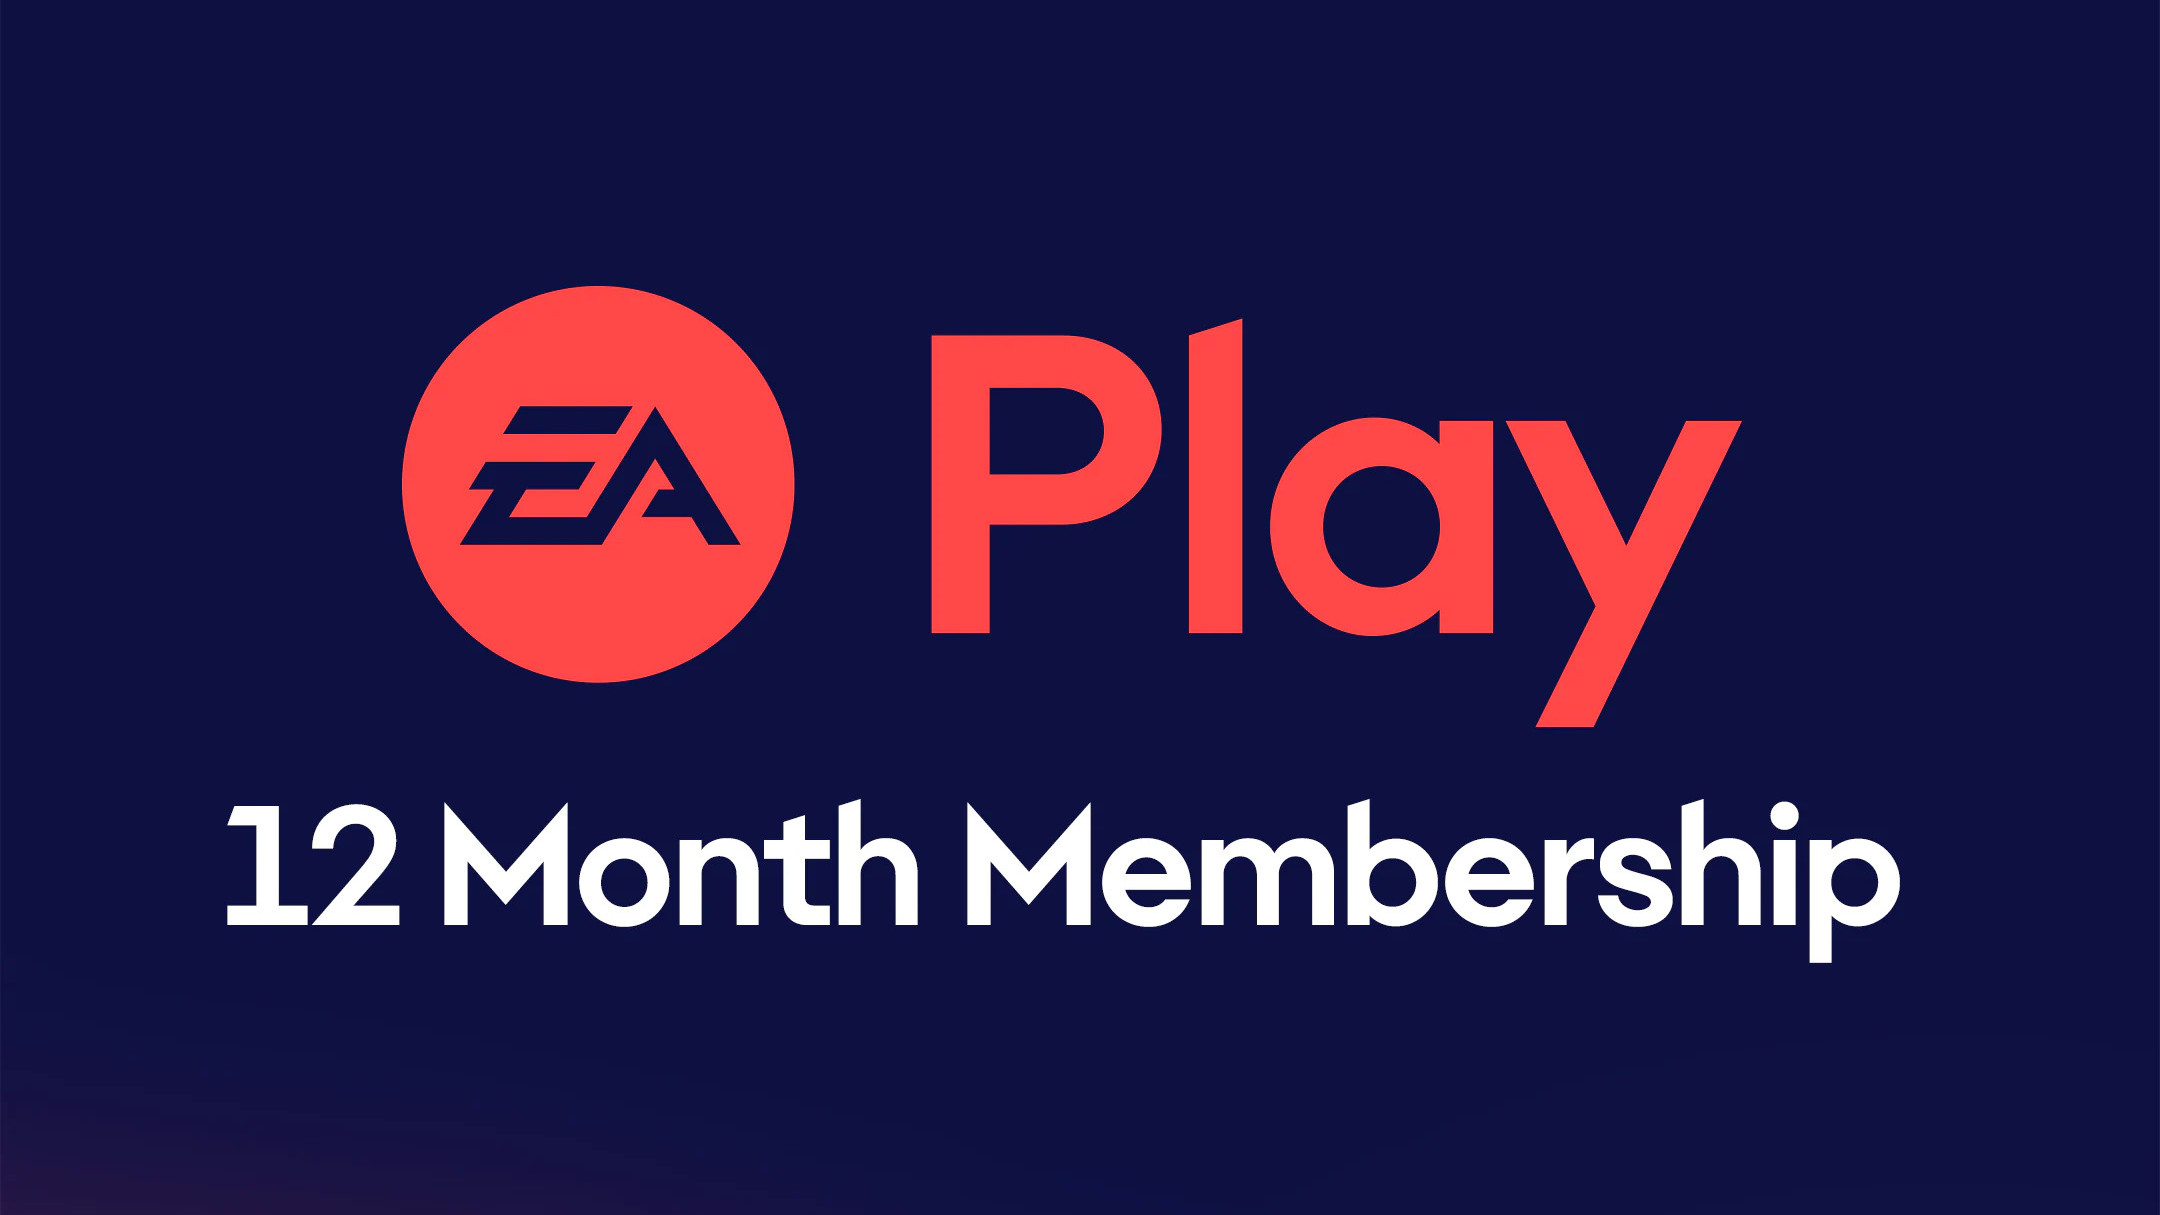 EA Play - 12 Months Subscription PlayStation 4/5 ACCOUNT 22.53 usd